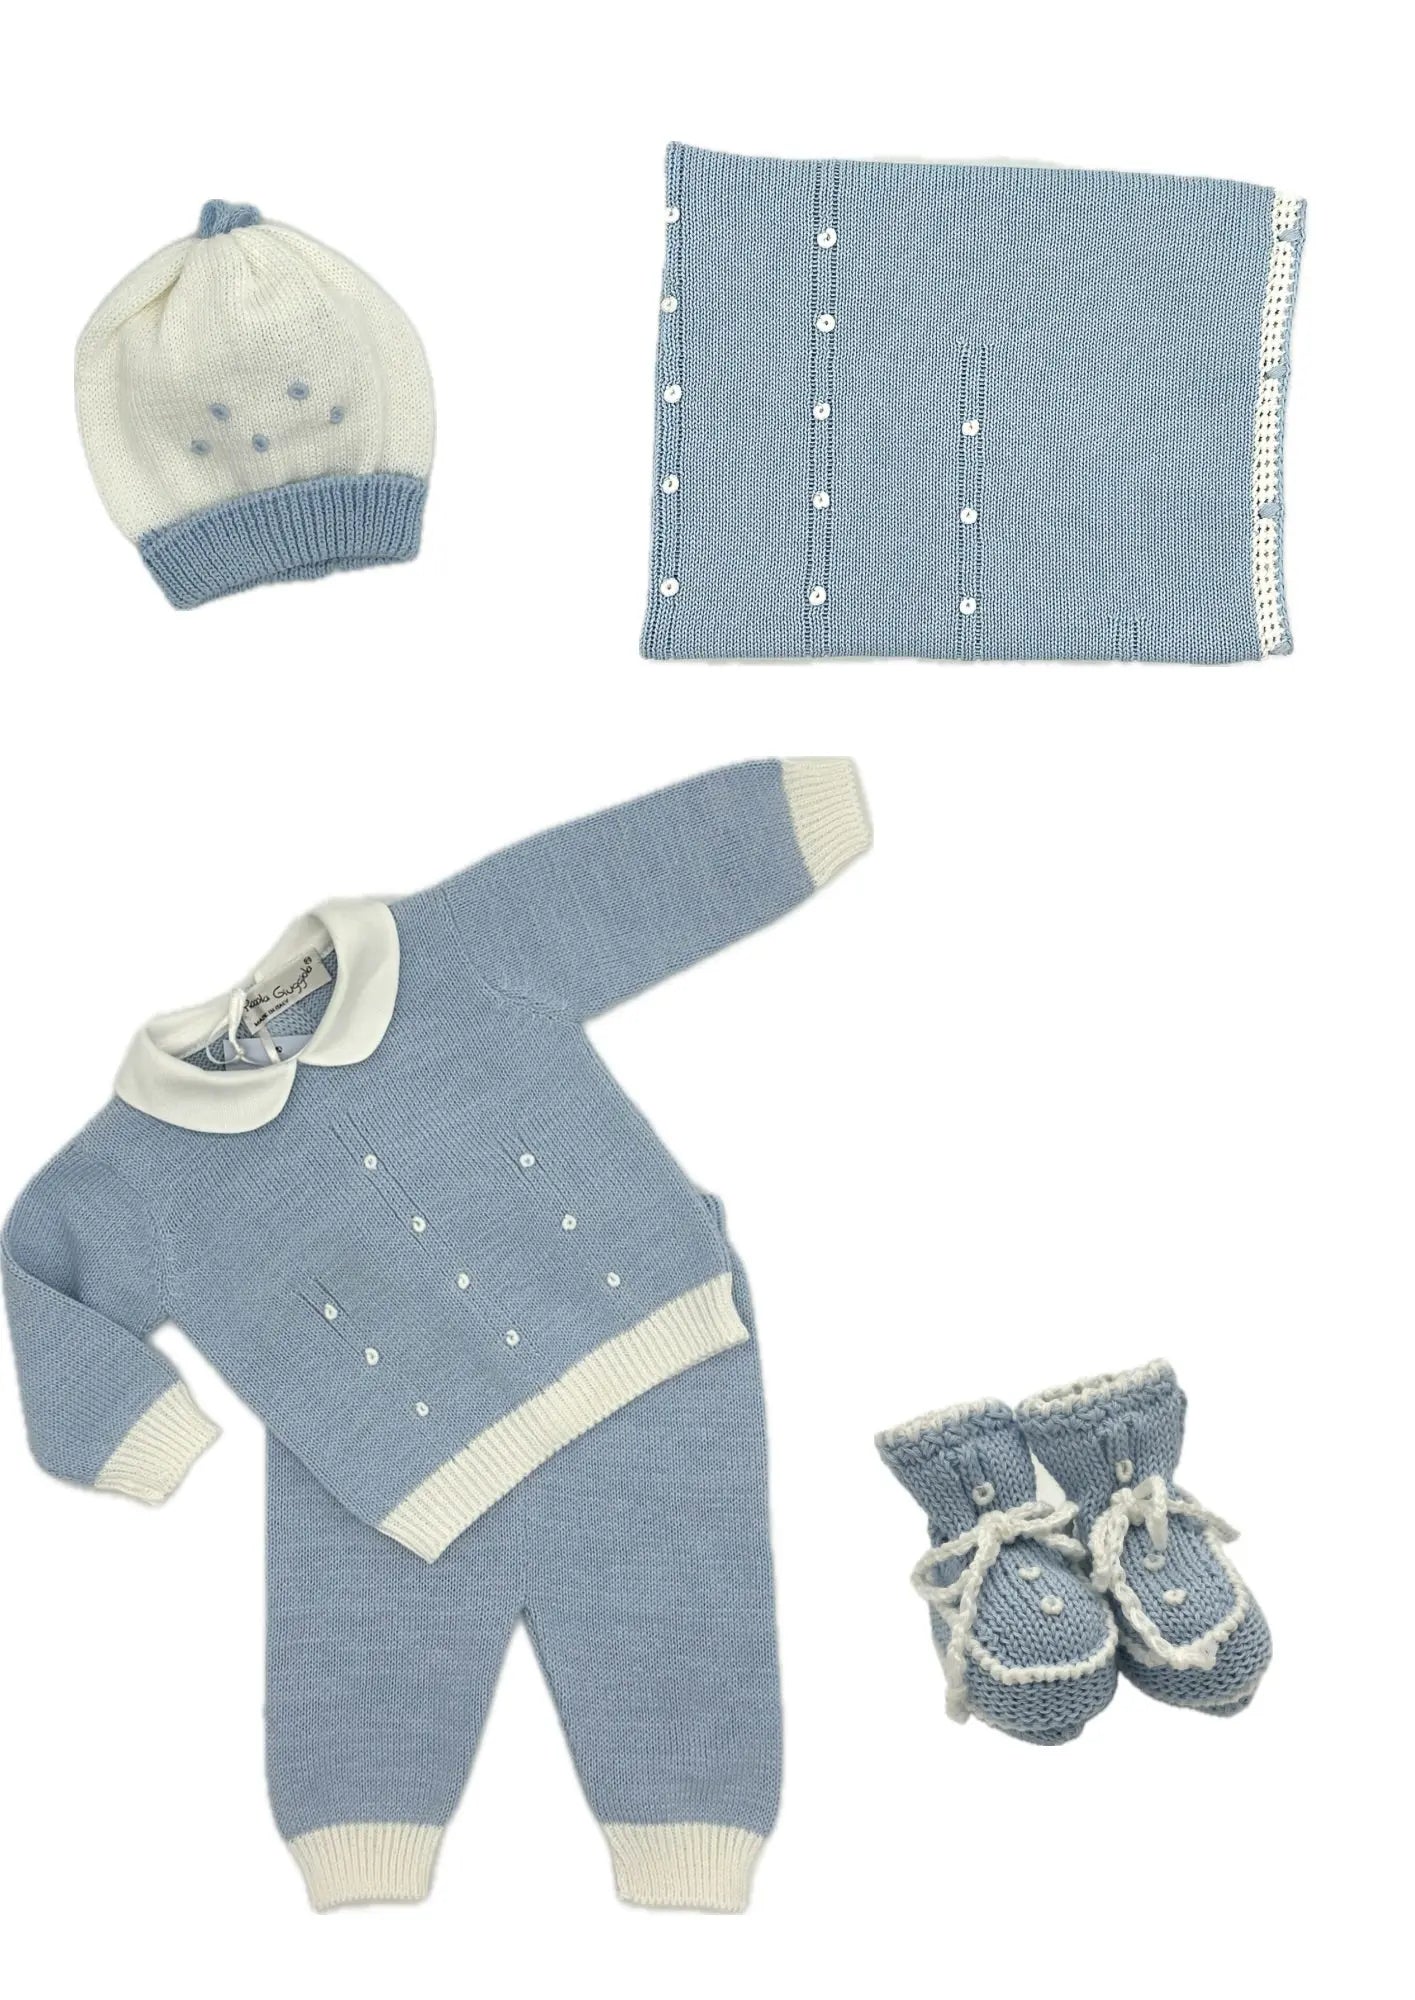 Blue Almonds Ltd Baby boys knitted layette gift 'Angelo' Piccola Giuggiola